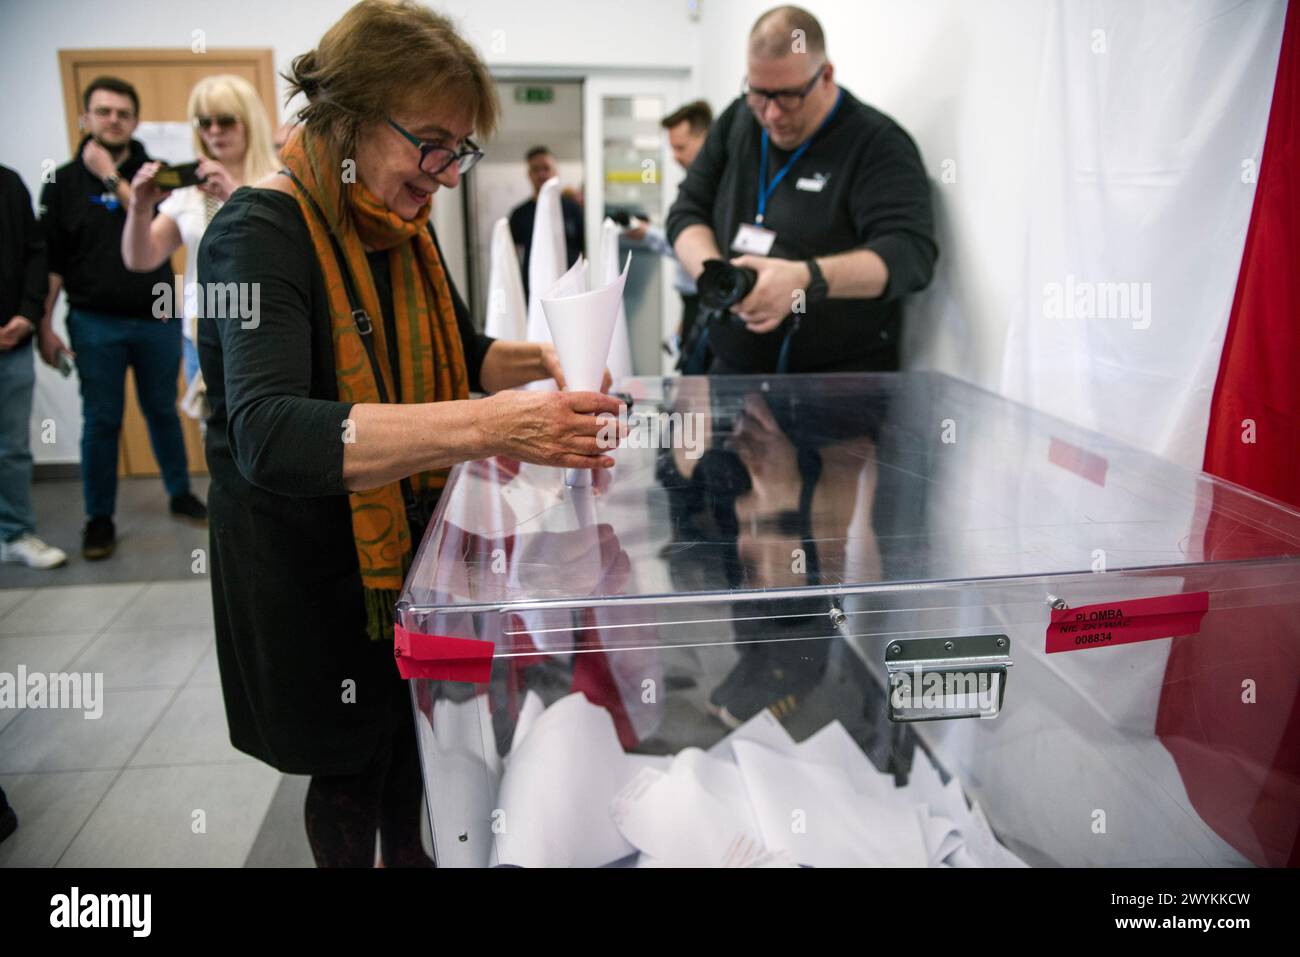 A woman casts her vote at the polling station during the local elections. Voters across Poland are casting ballots in local elections in the first electoral test for the coalition government of PM Donald Tusk nearly four months since it took power. Voters elected mayors as well as members of municipal councils and provincial assemblies. Among those running is Rafal Trzaskowski - Mayor of Warsaw, a Tusk ally who is seeking a second term. Opinion polls showed the two largest political formations running neck-and-neck: Tusk's Civic Coalition, an electoral coalition led by his centrist and pro-Eu Stock Photo